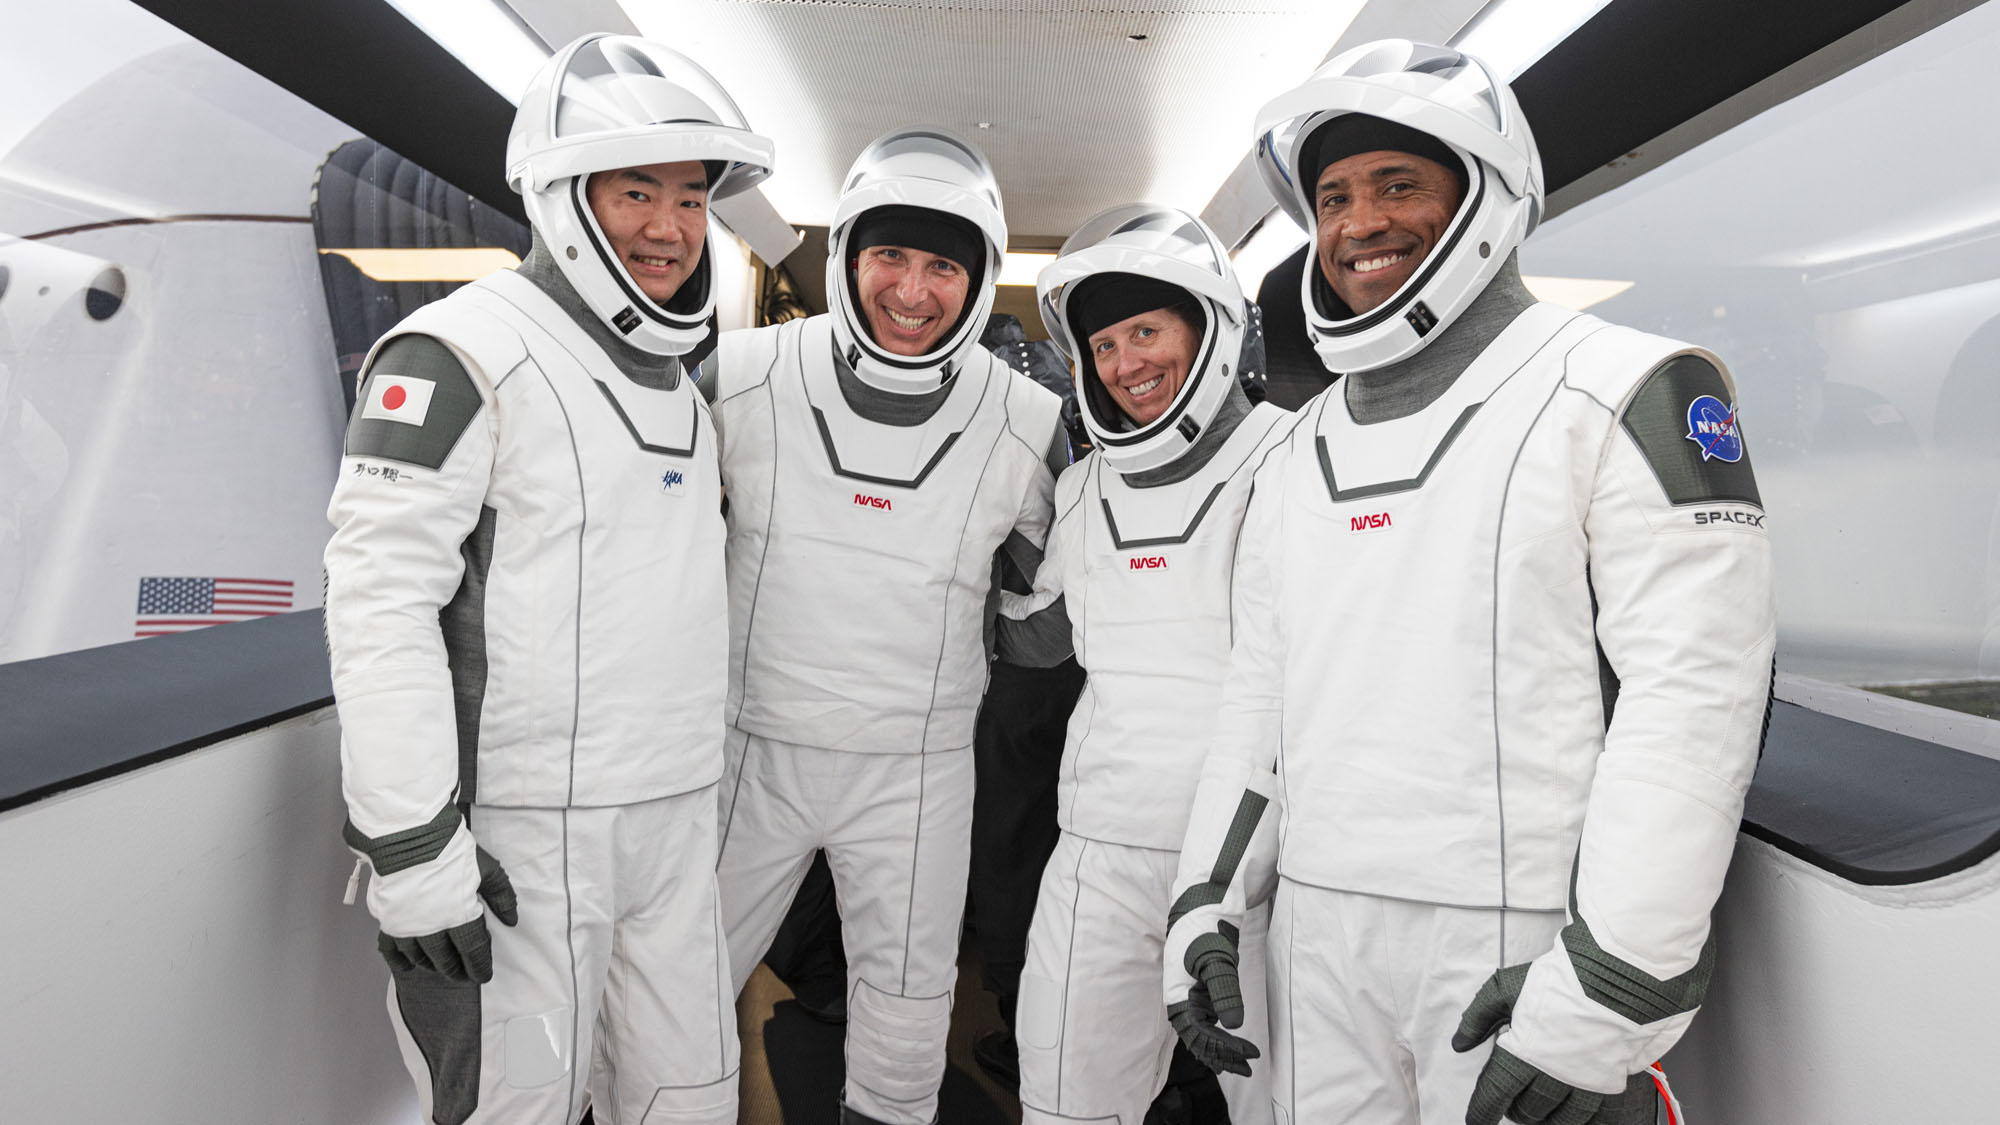 Meet Crew-1: These are the 4 astronauts who are flying on SpaceX's next  Crew Dragon | Space